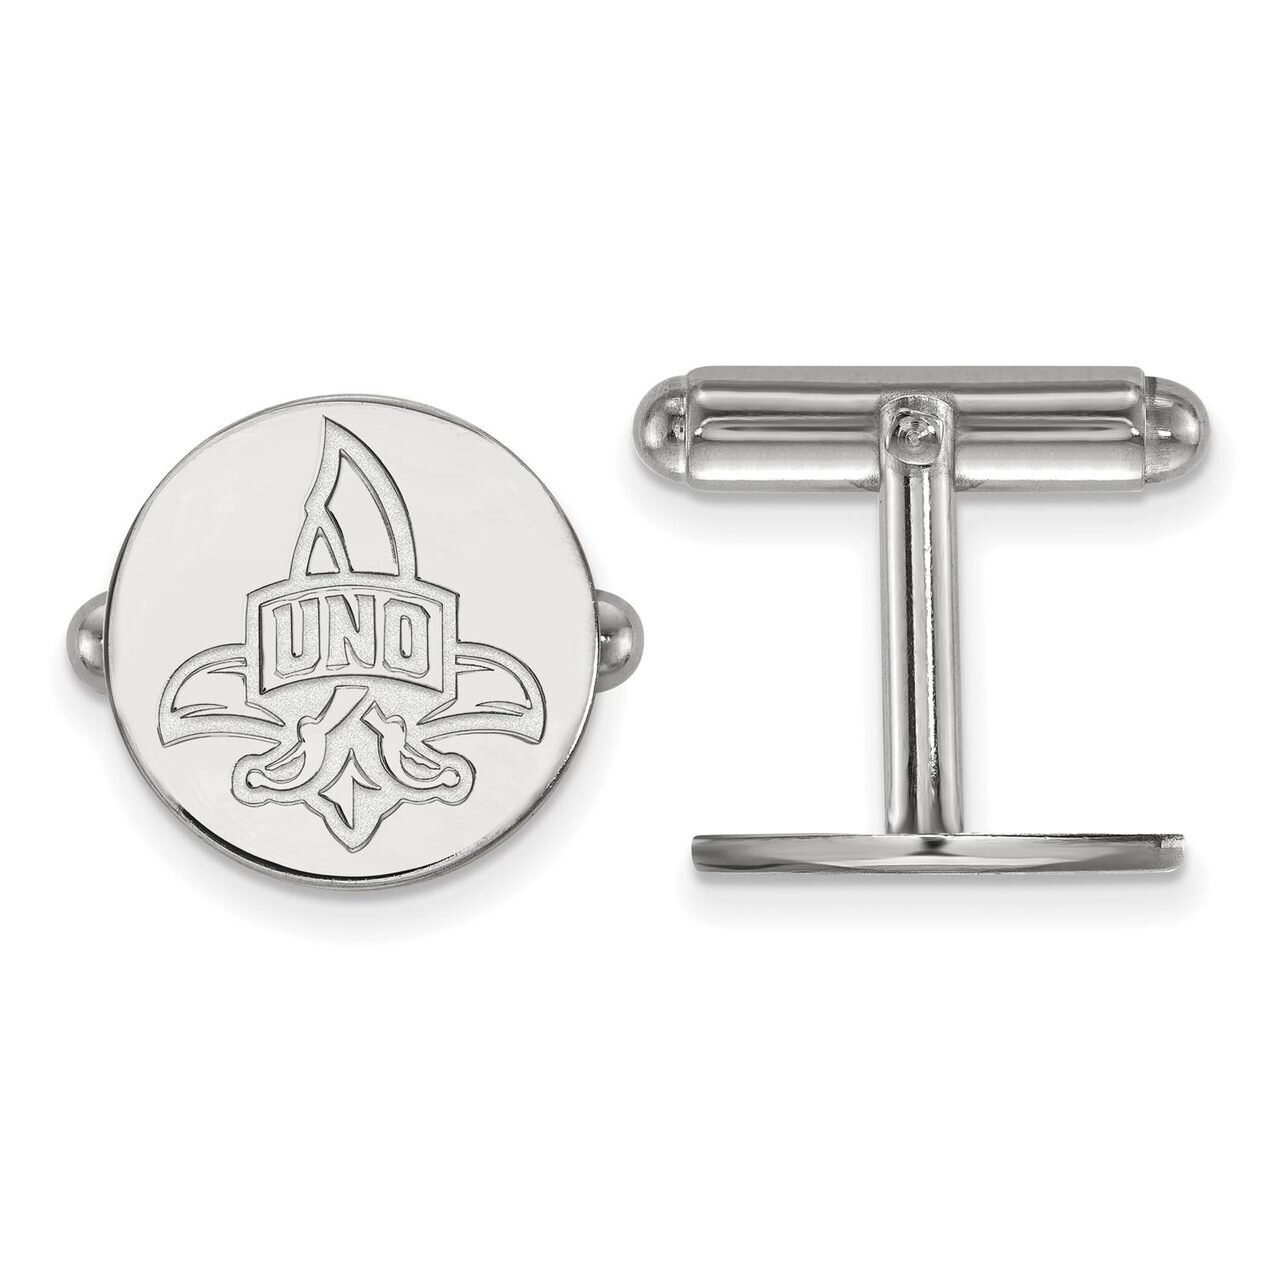 University of New Orleans Cufflinks Sterling Silver SS008UNO